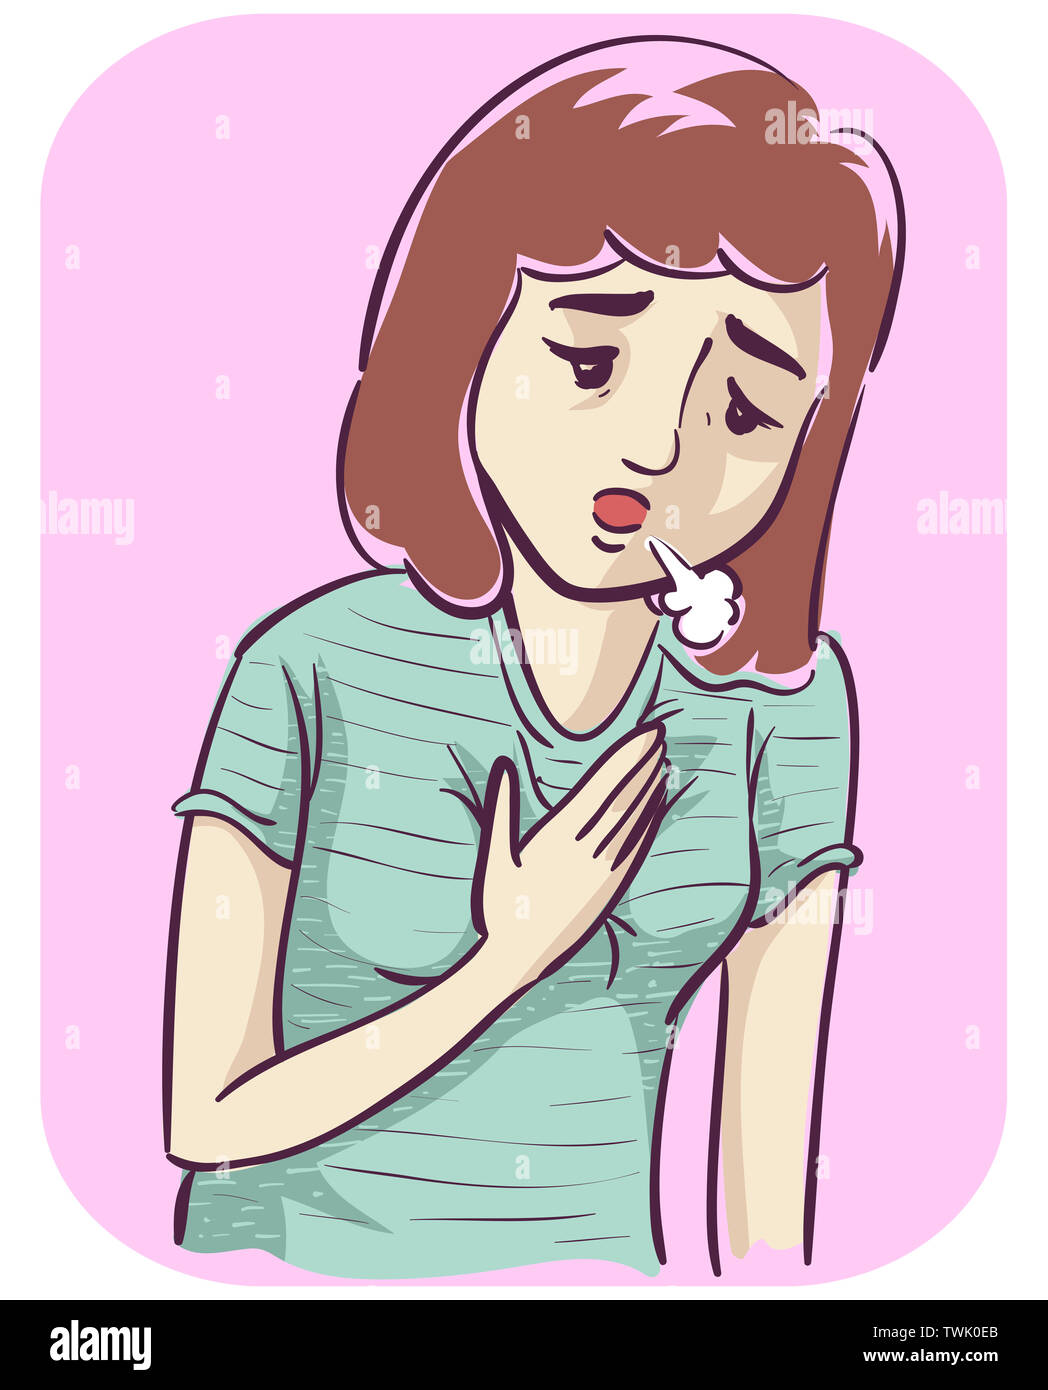 Illustration of a Girl Pressing Against Her Chest Experiencing a Shortness of Breath Stock Photo